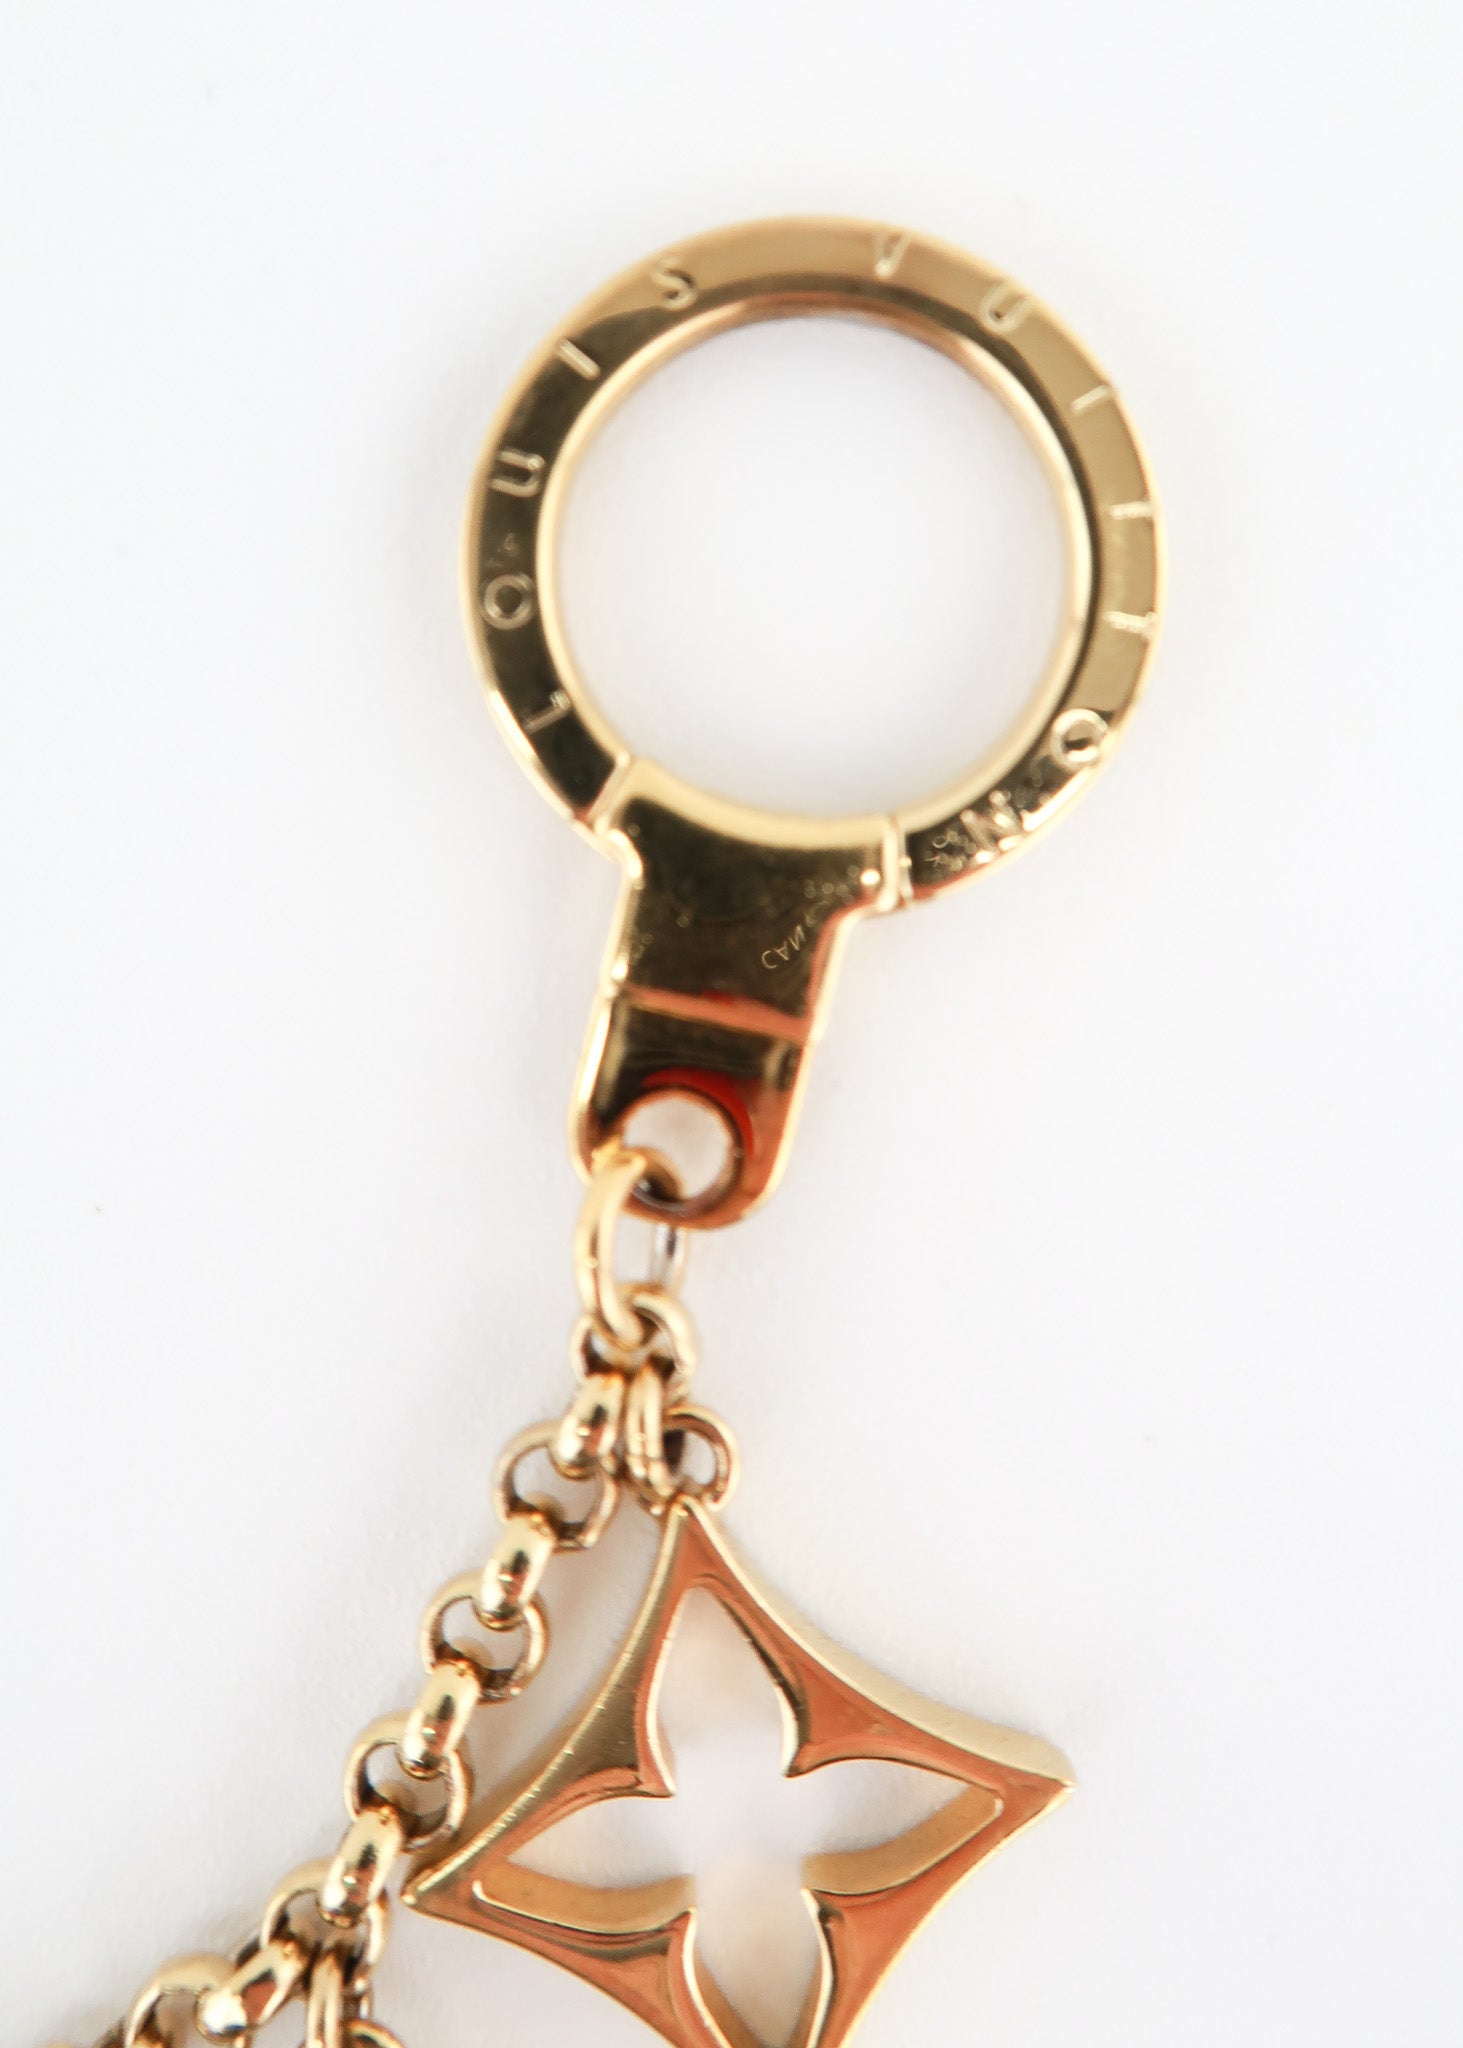 Fleur de Monogram Bag Charm and Key Holder Resin and Brass (Authentic  Pre-Owned)